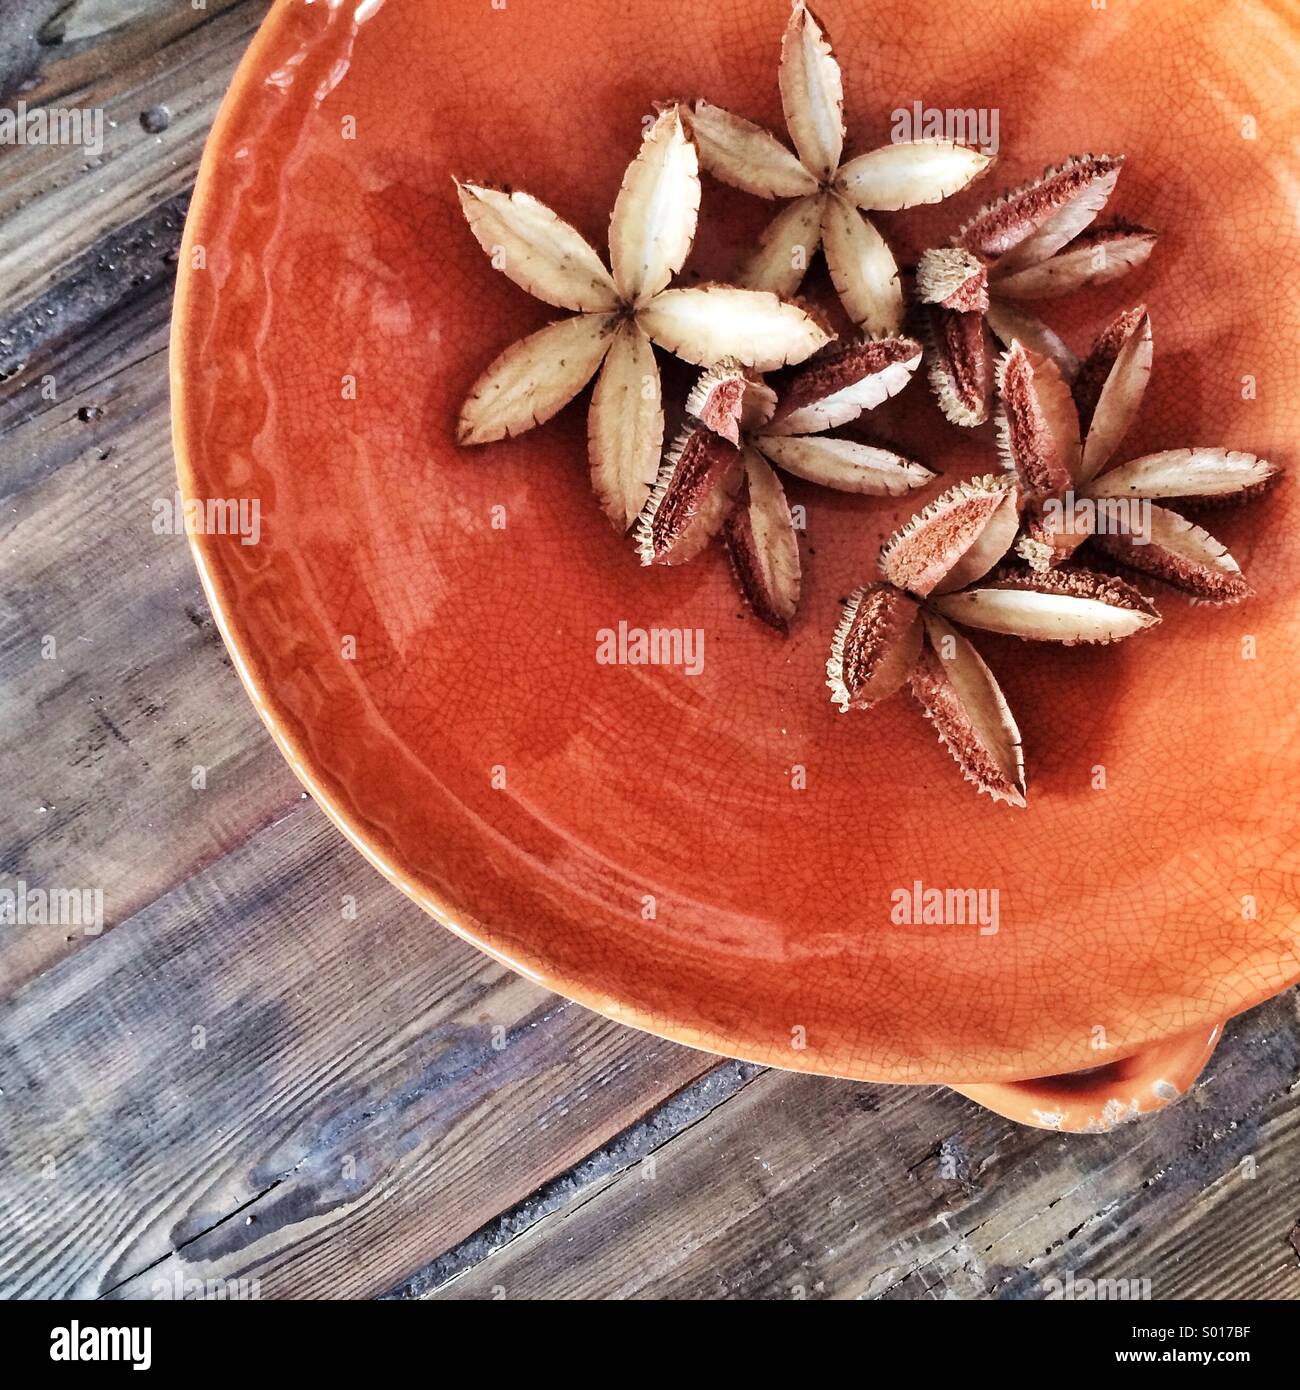 Open seed pods in orange bowl on rustic wooden table Stock Photo